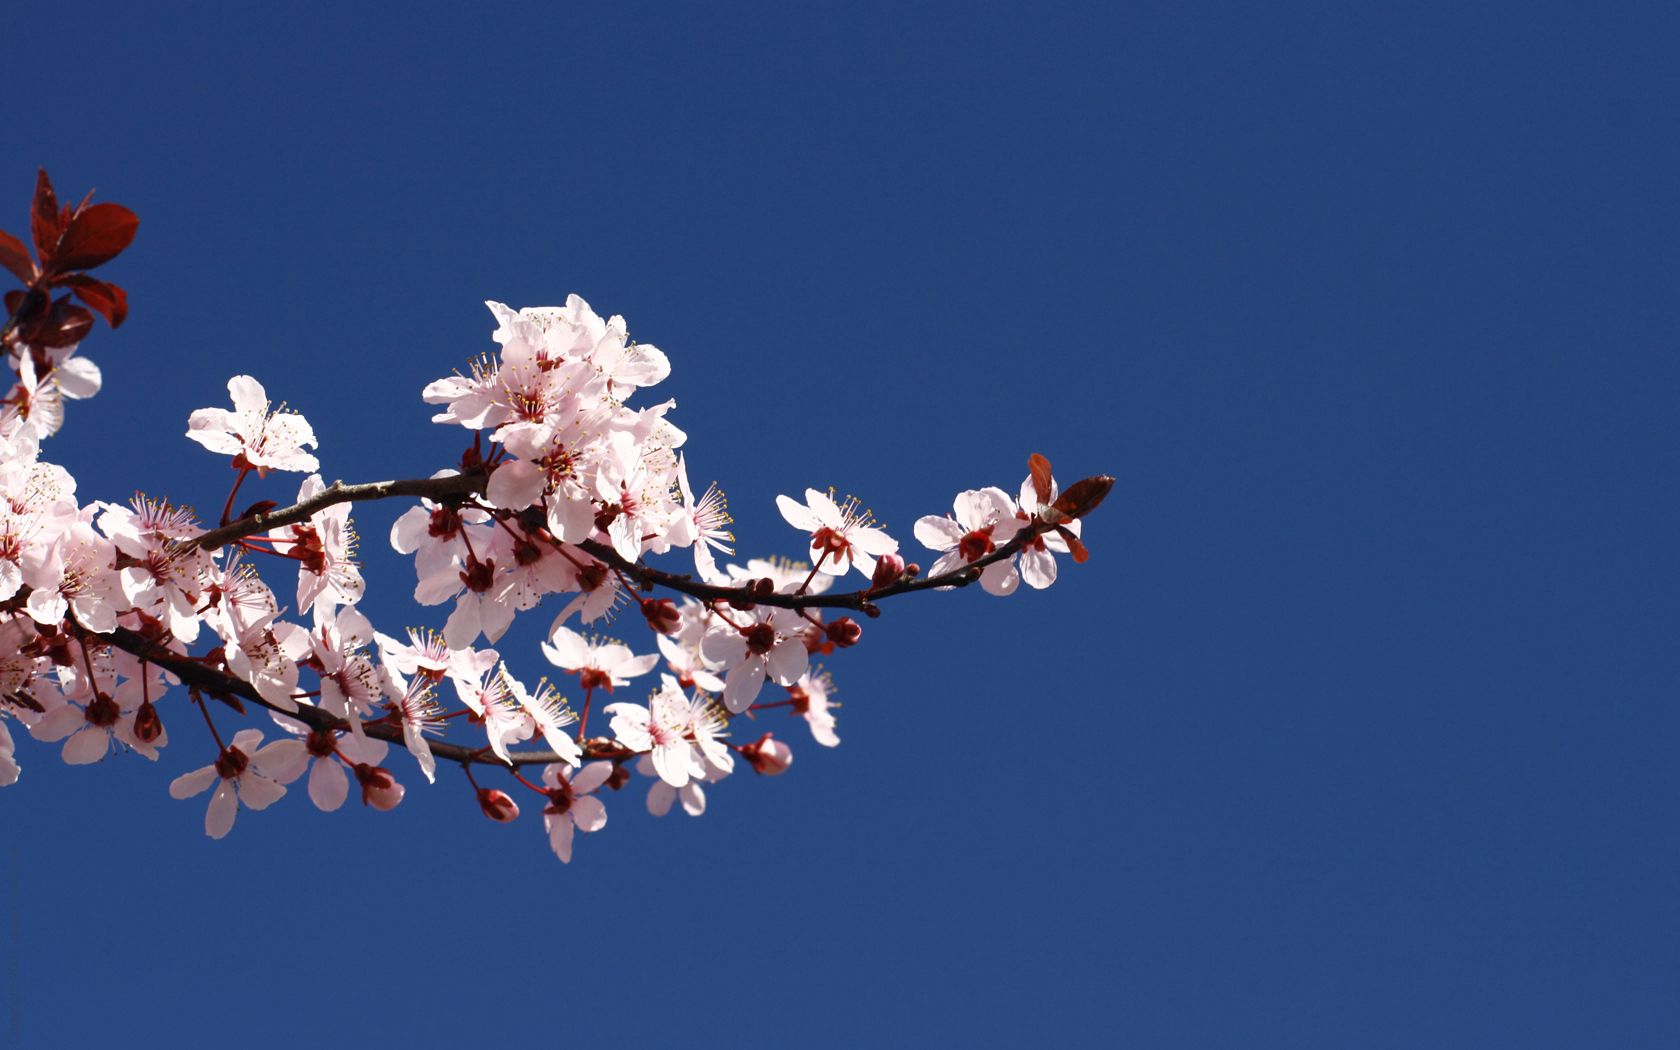 120441 free download Blue wallpapers for phone, spring, branch, flowering, sky Blue images and screensavers for mobile